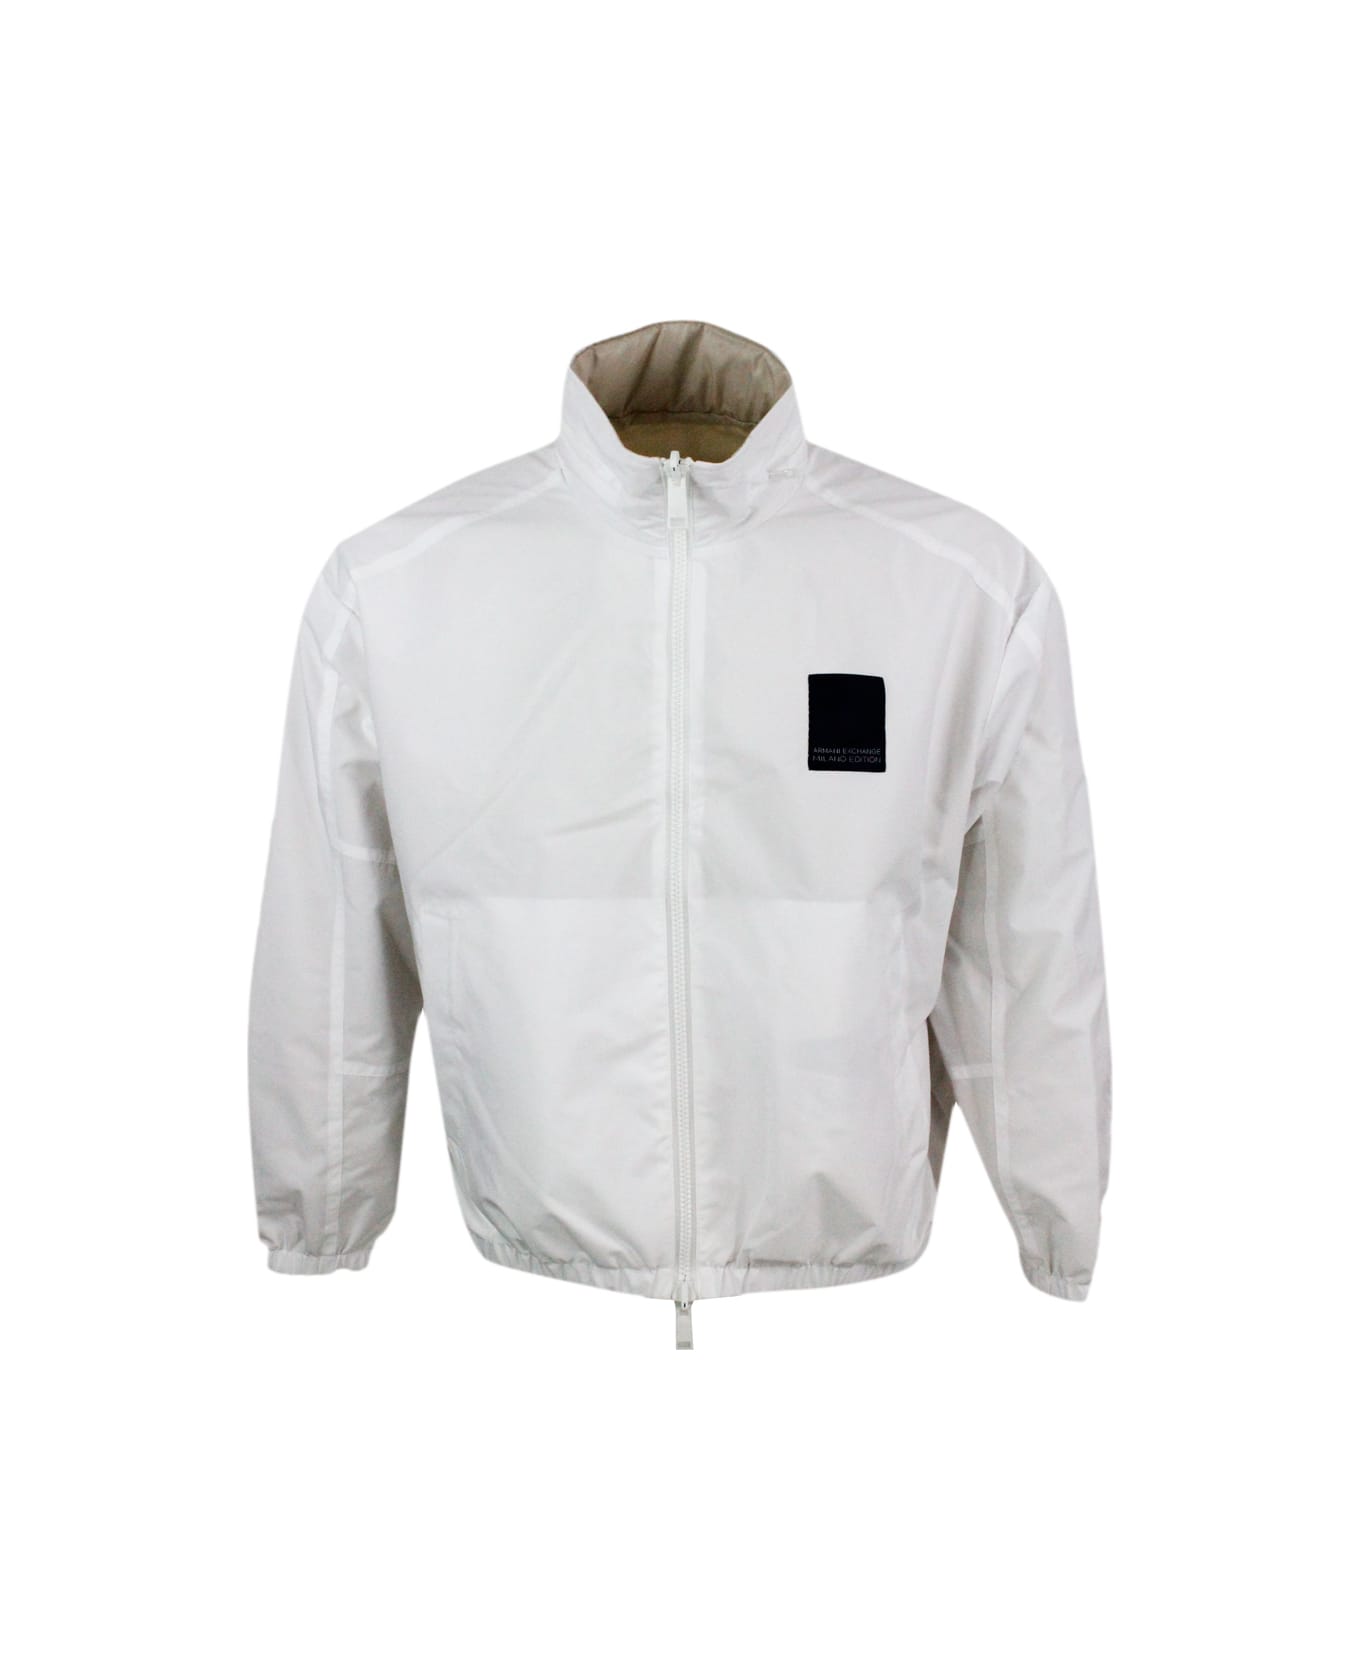 Armani Collezioni Reversible Windproof Jacket In Light Technical Fabric, Milano Edition Line, Zip Closure And Concealed Hood - White